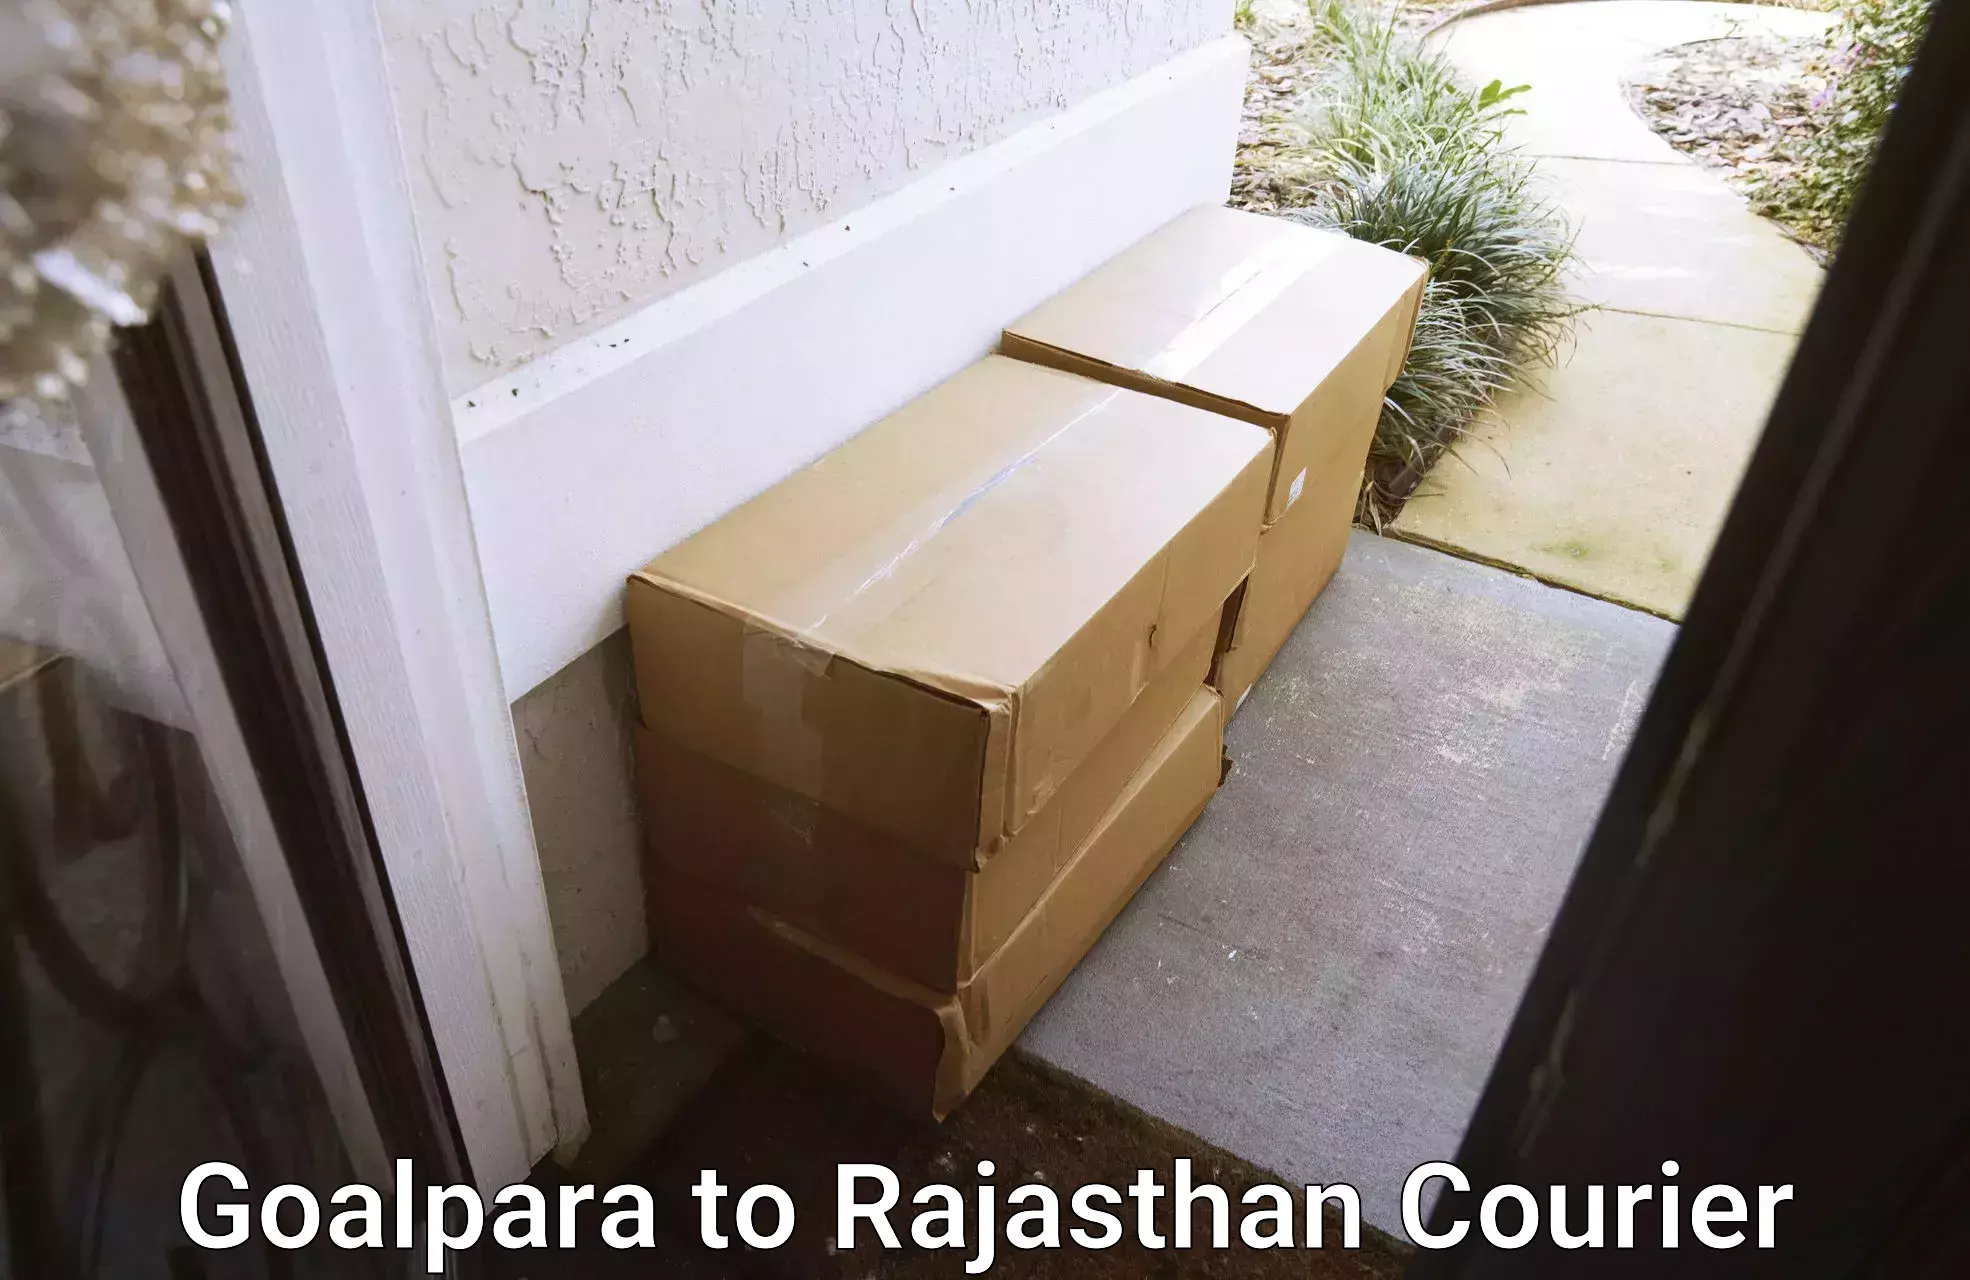 Business delivery service Goalpara to Rajasthan